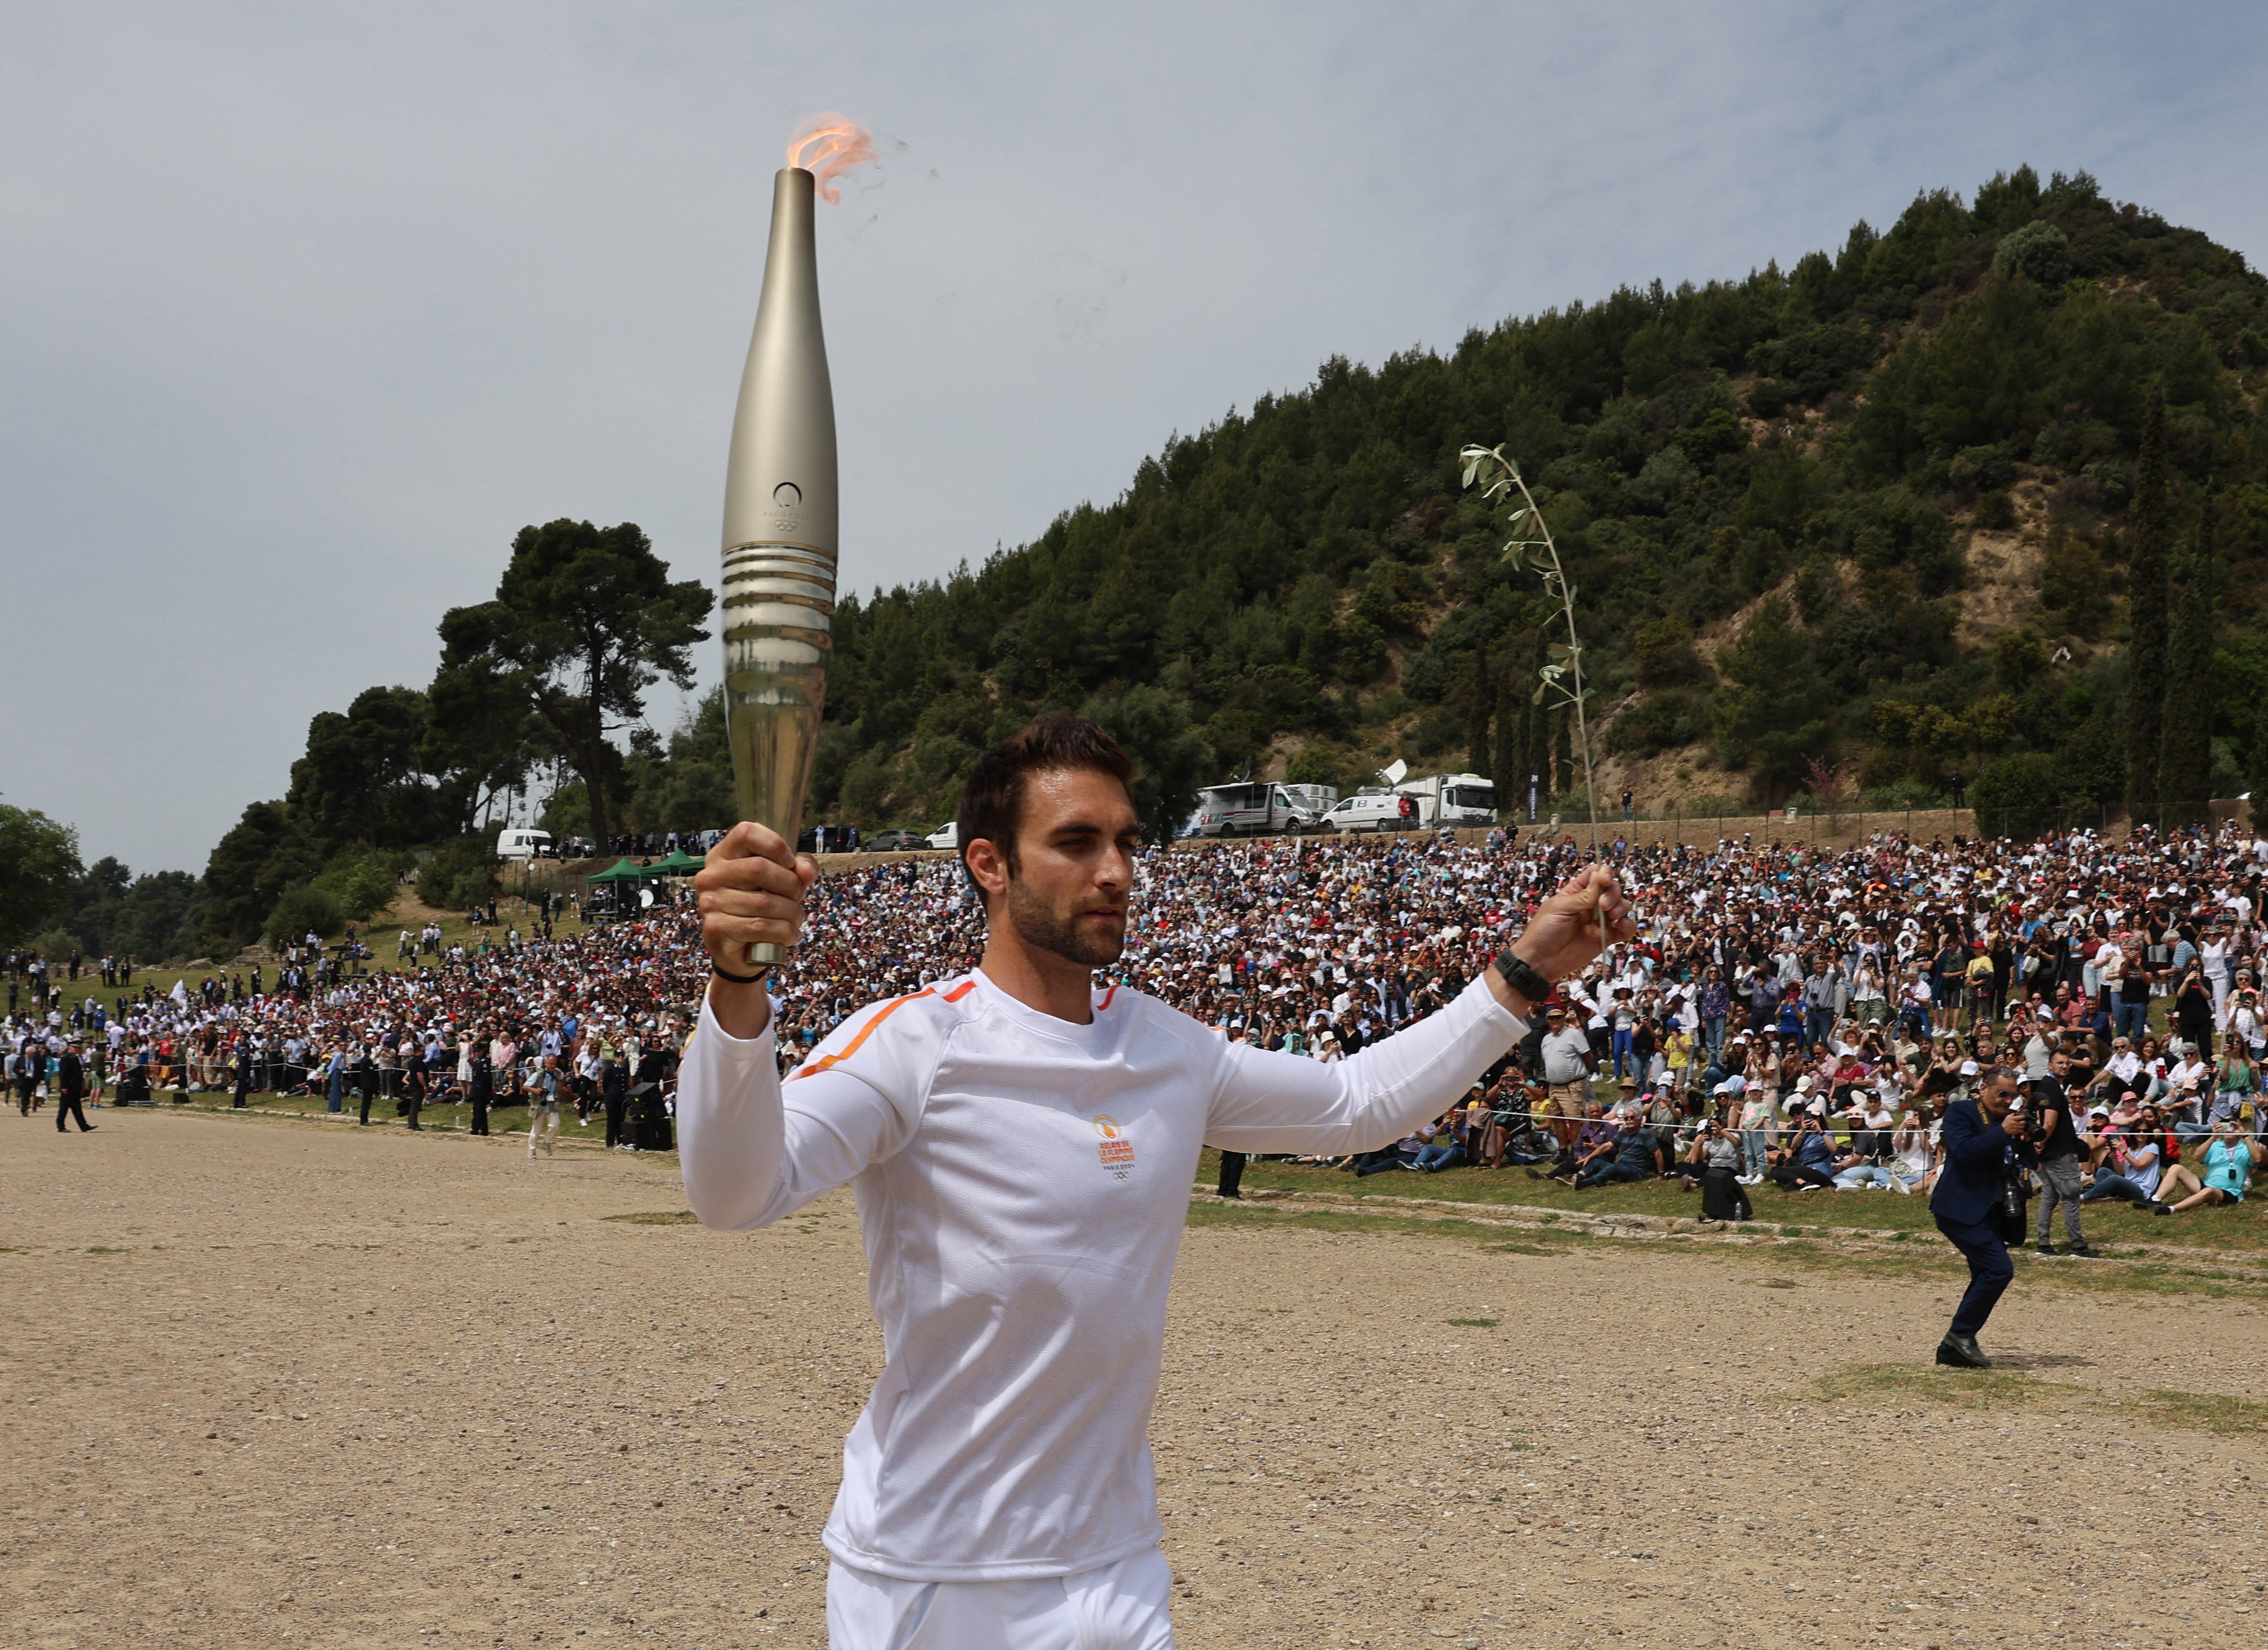 Greek rower Stefanos Ntouskos carries the Olympic Flame during the start of the torch relay for the Paris 2024 games